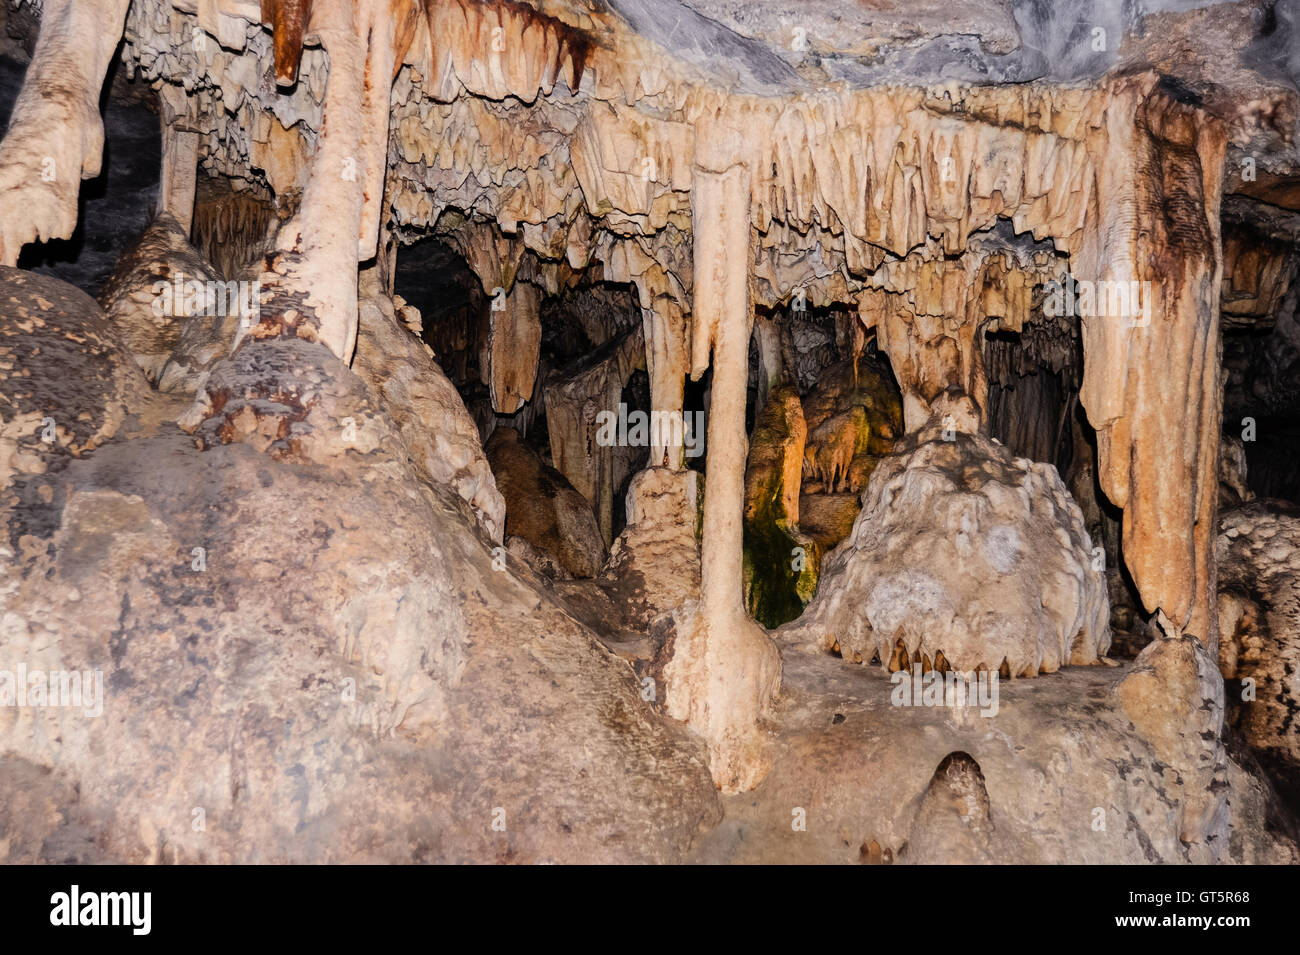 The Cango Caves are located at the foothills of the Swartberg range near the town of Oudtshoorn, South Africa. Stock Photo